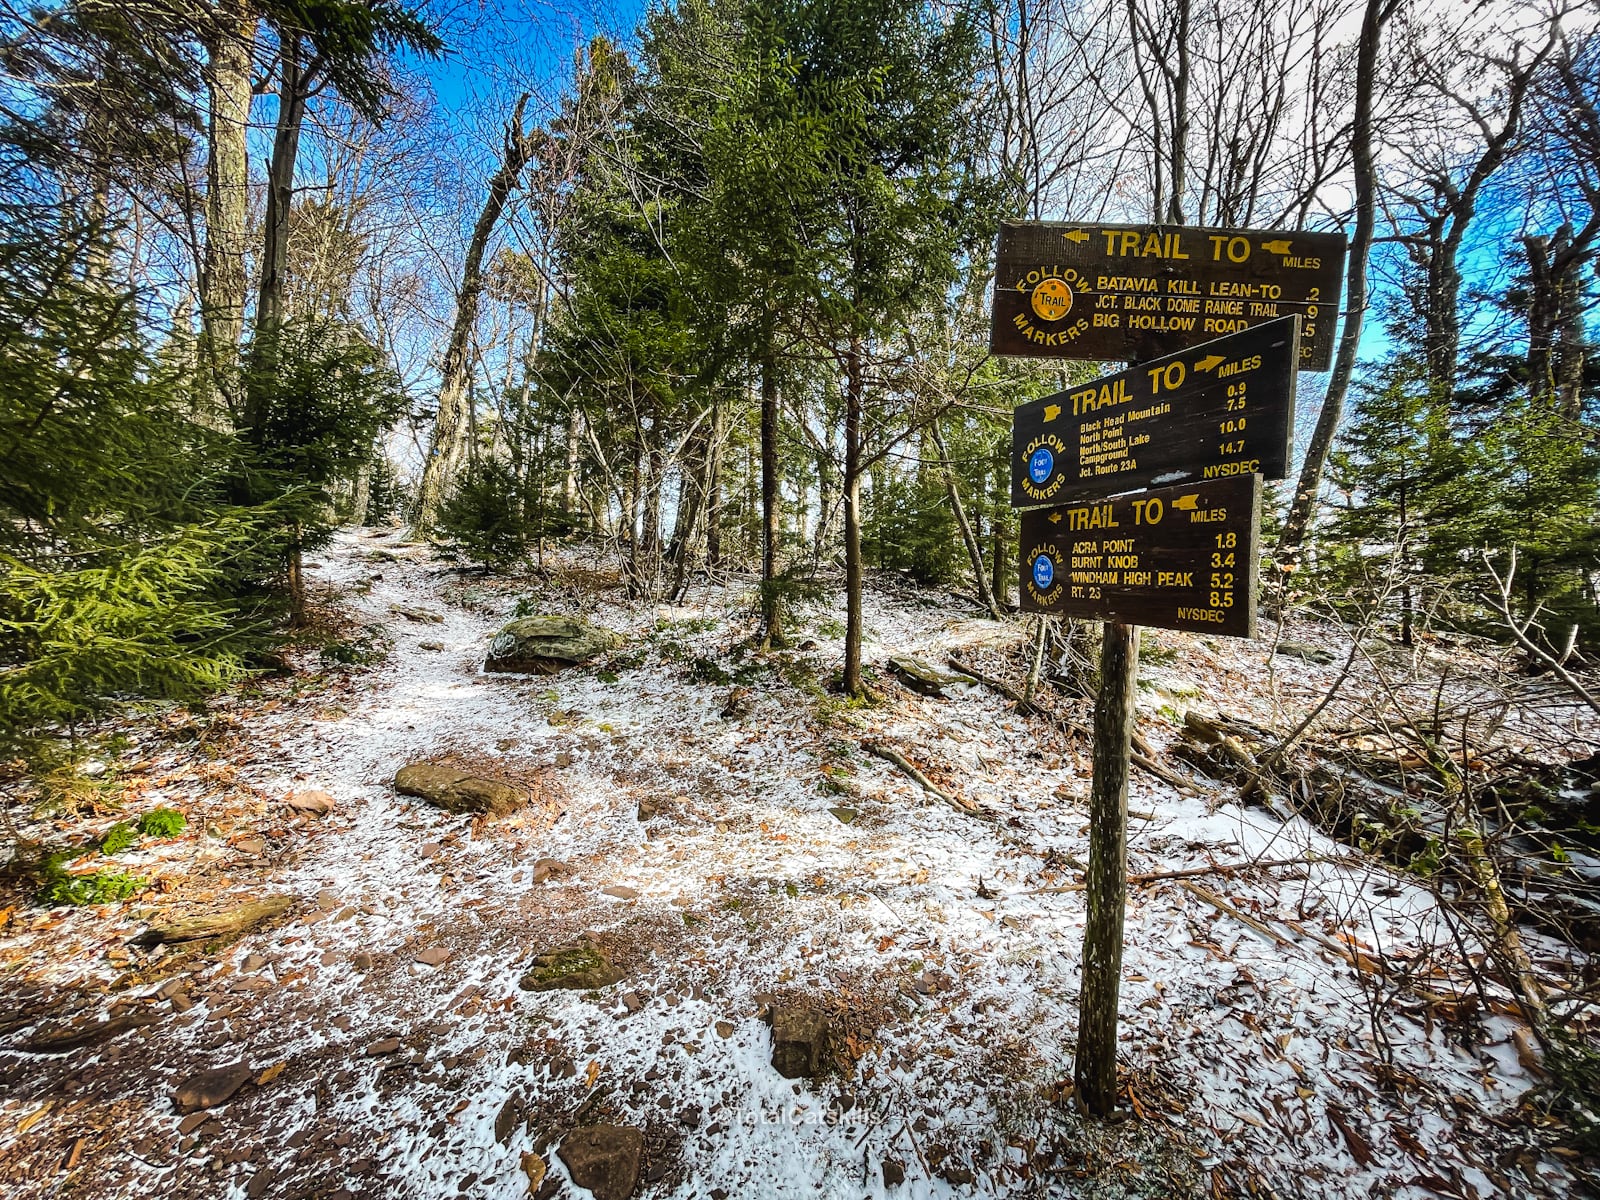 trail signage in snowy forest